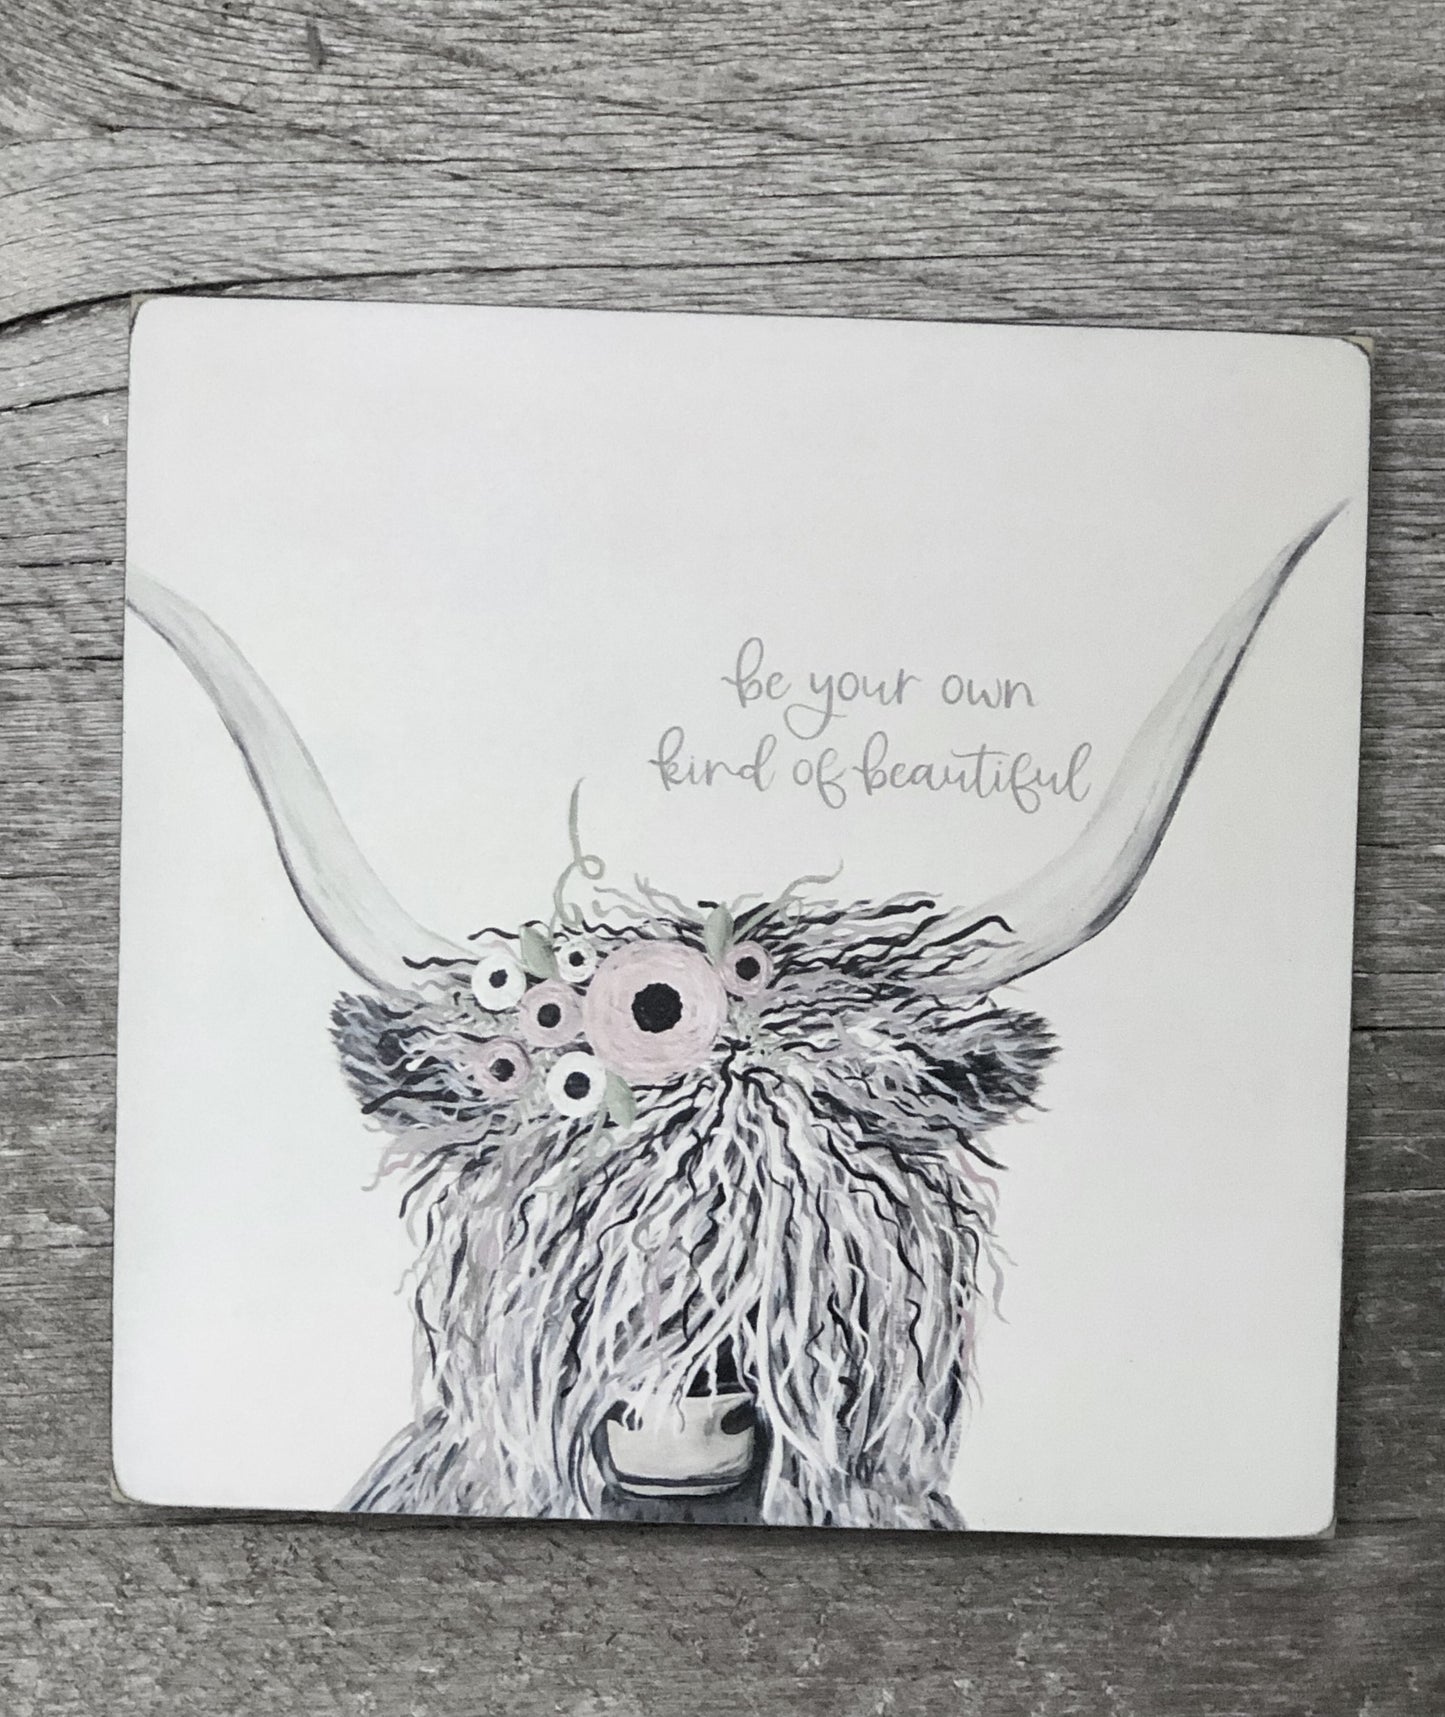 BE YOUR OWN KIND OF BEAUTIFUL HIGHLANDER COW PRINT - WOOD SIGN